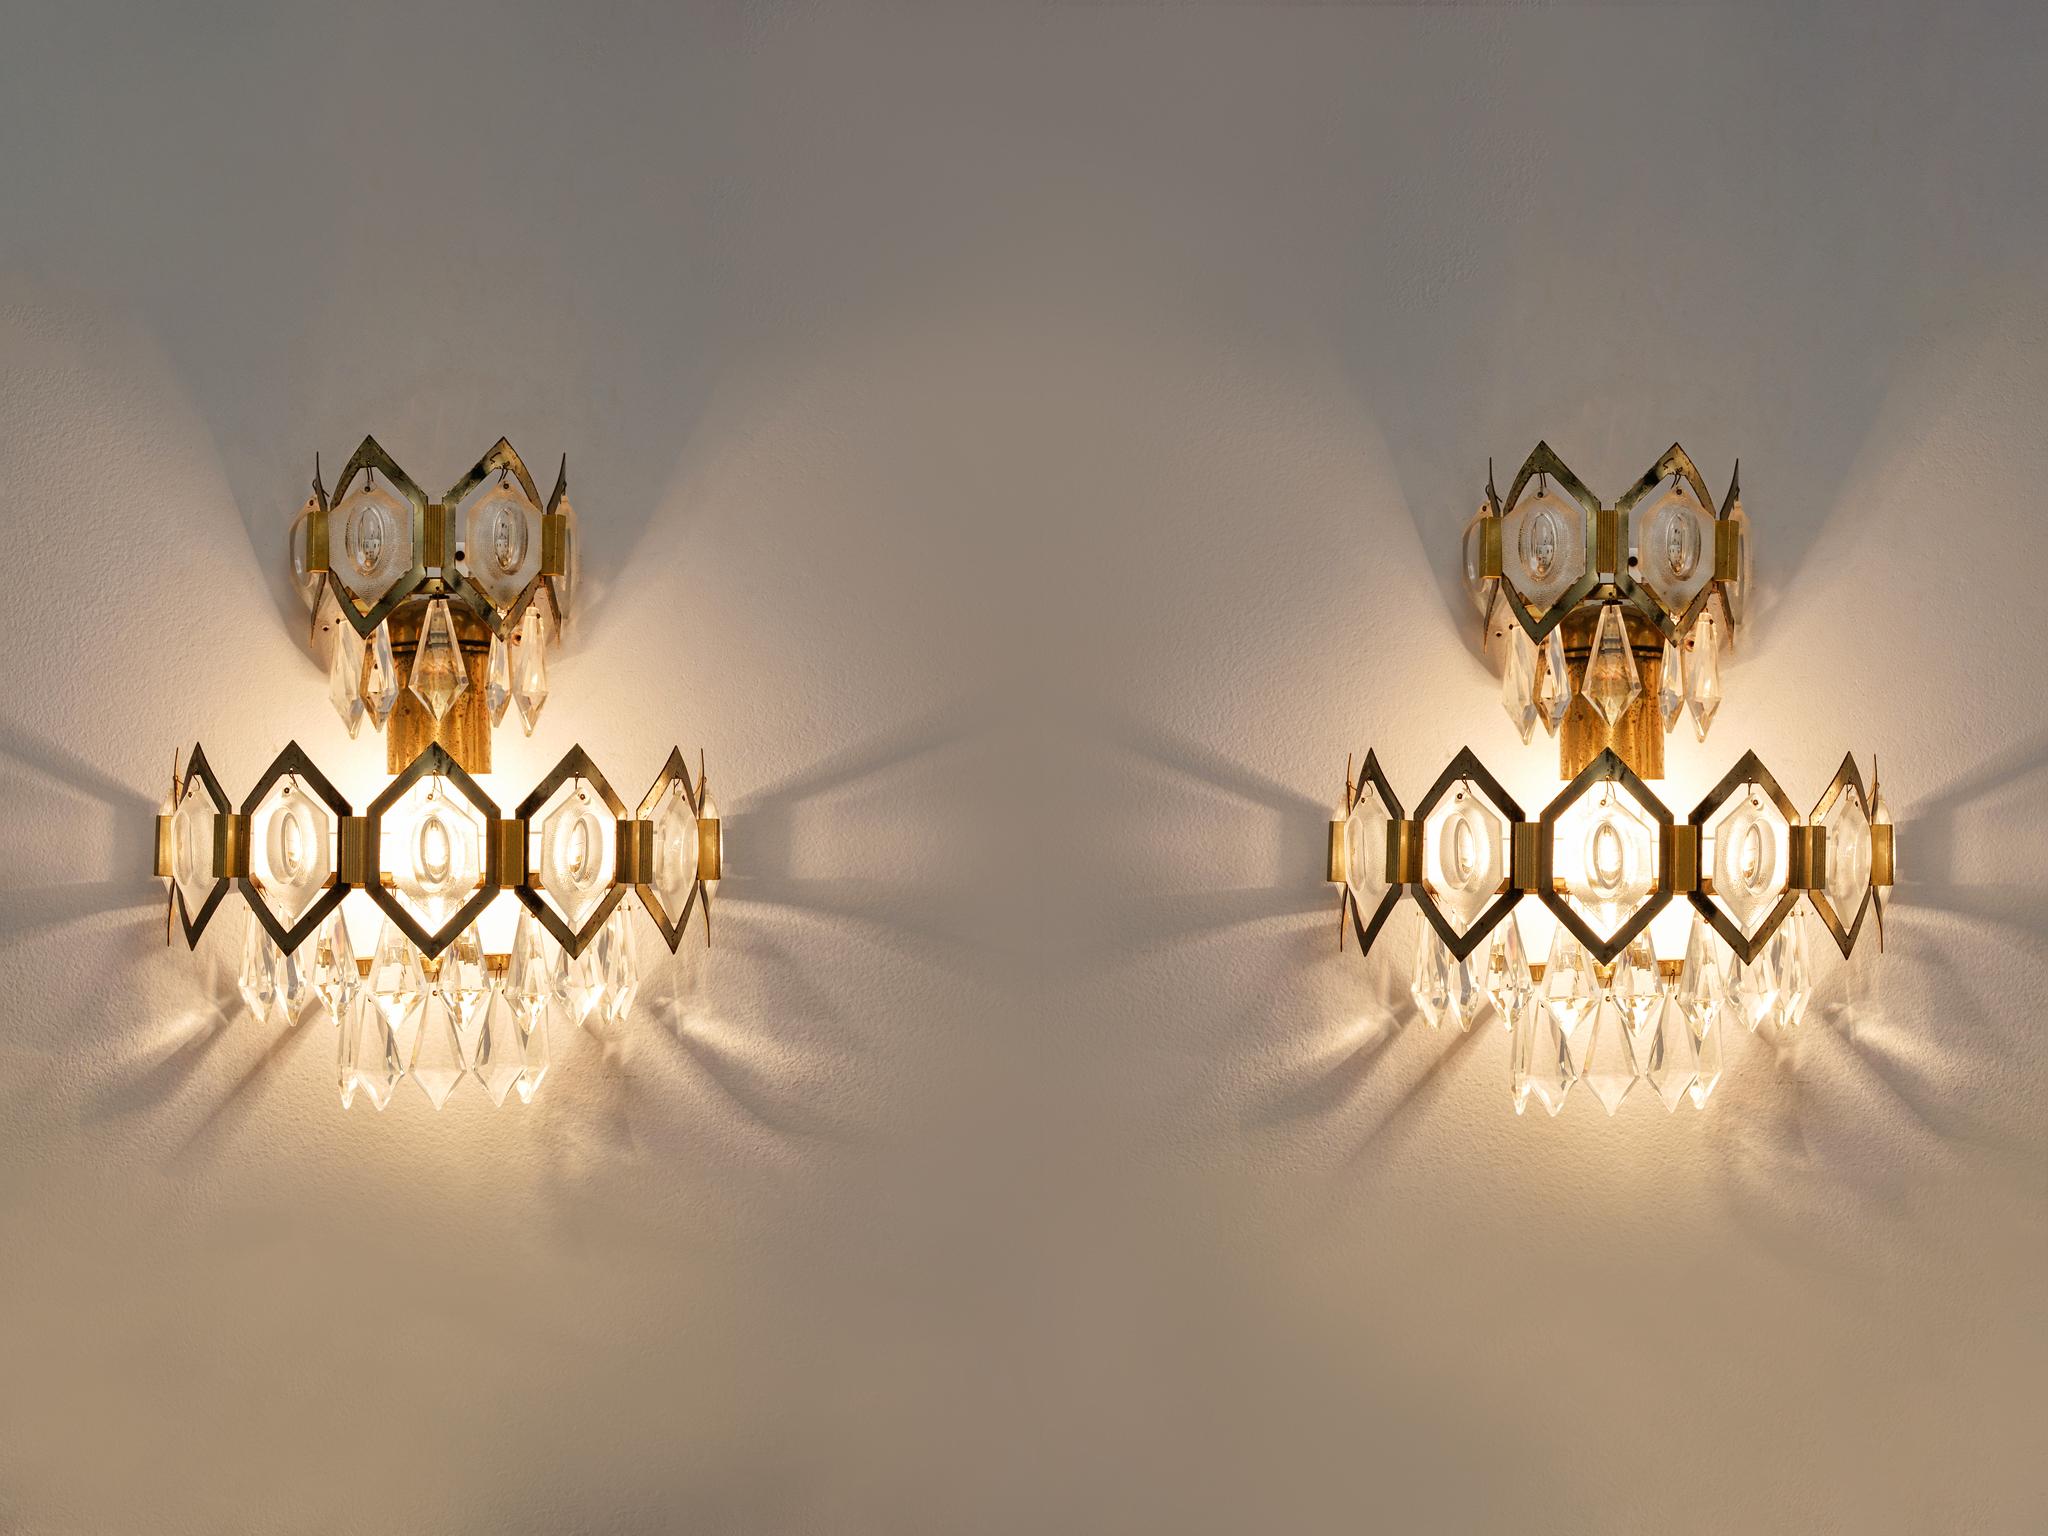 Pair of wall lights, in glass and brass, European 1960s

Pair of crystal sconces with brass fixture. These wall lights come with the elegance of royal lighting. The brass frame reminds of a crown. In combination with the frosted glass icicles, these